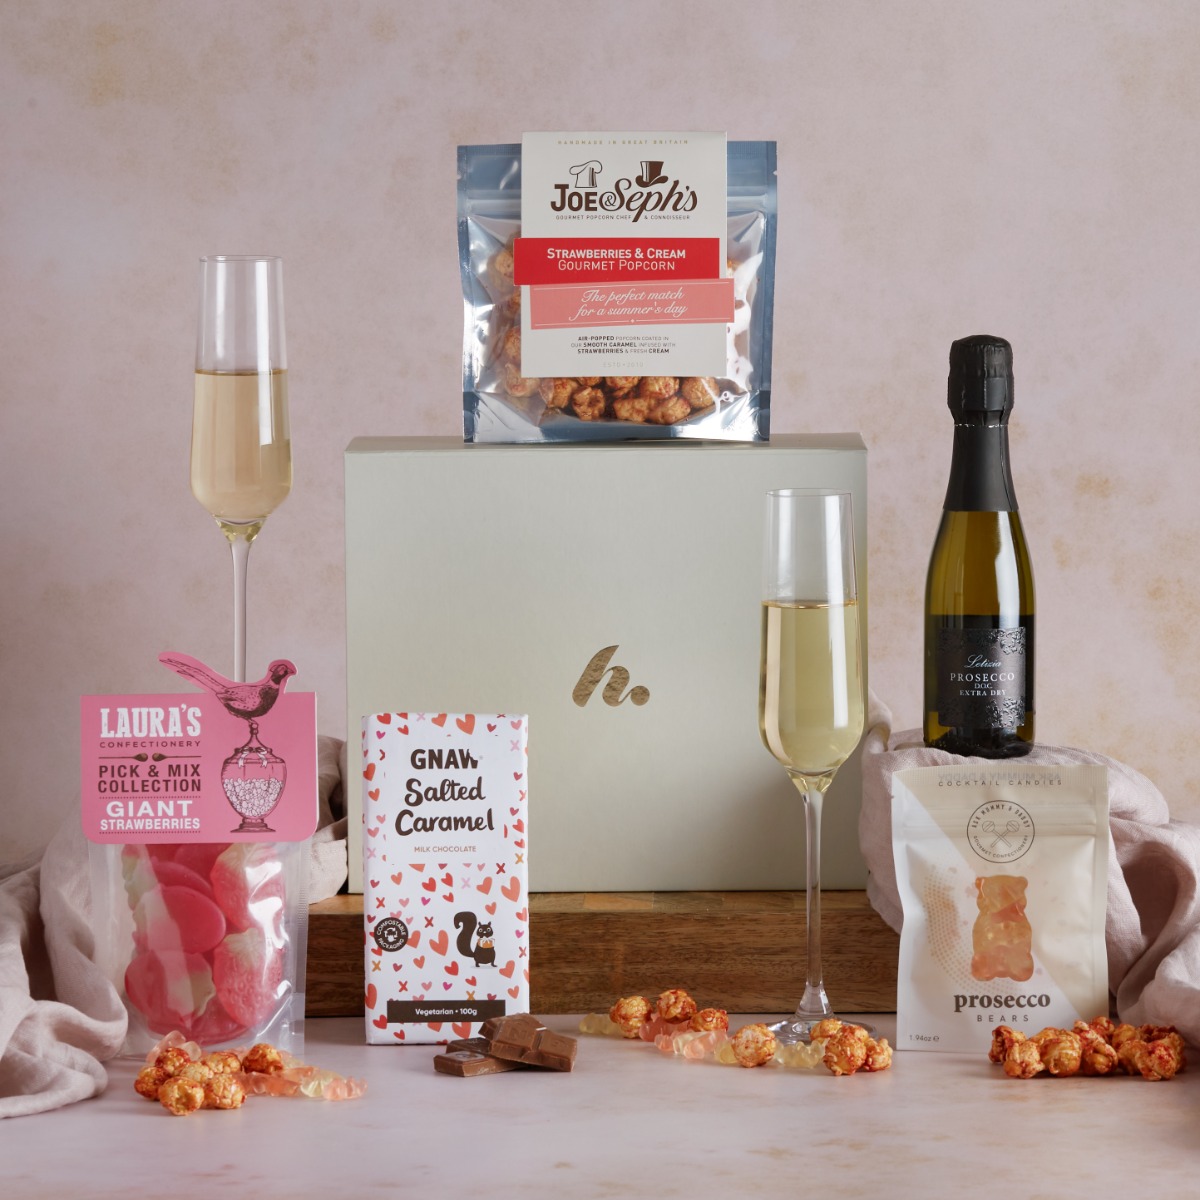 Prosecco & Sweets Gift Champagne & Prosecco Gifts Hampers.com